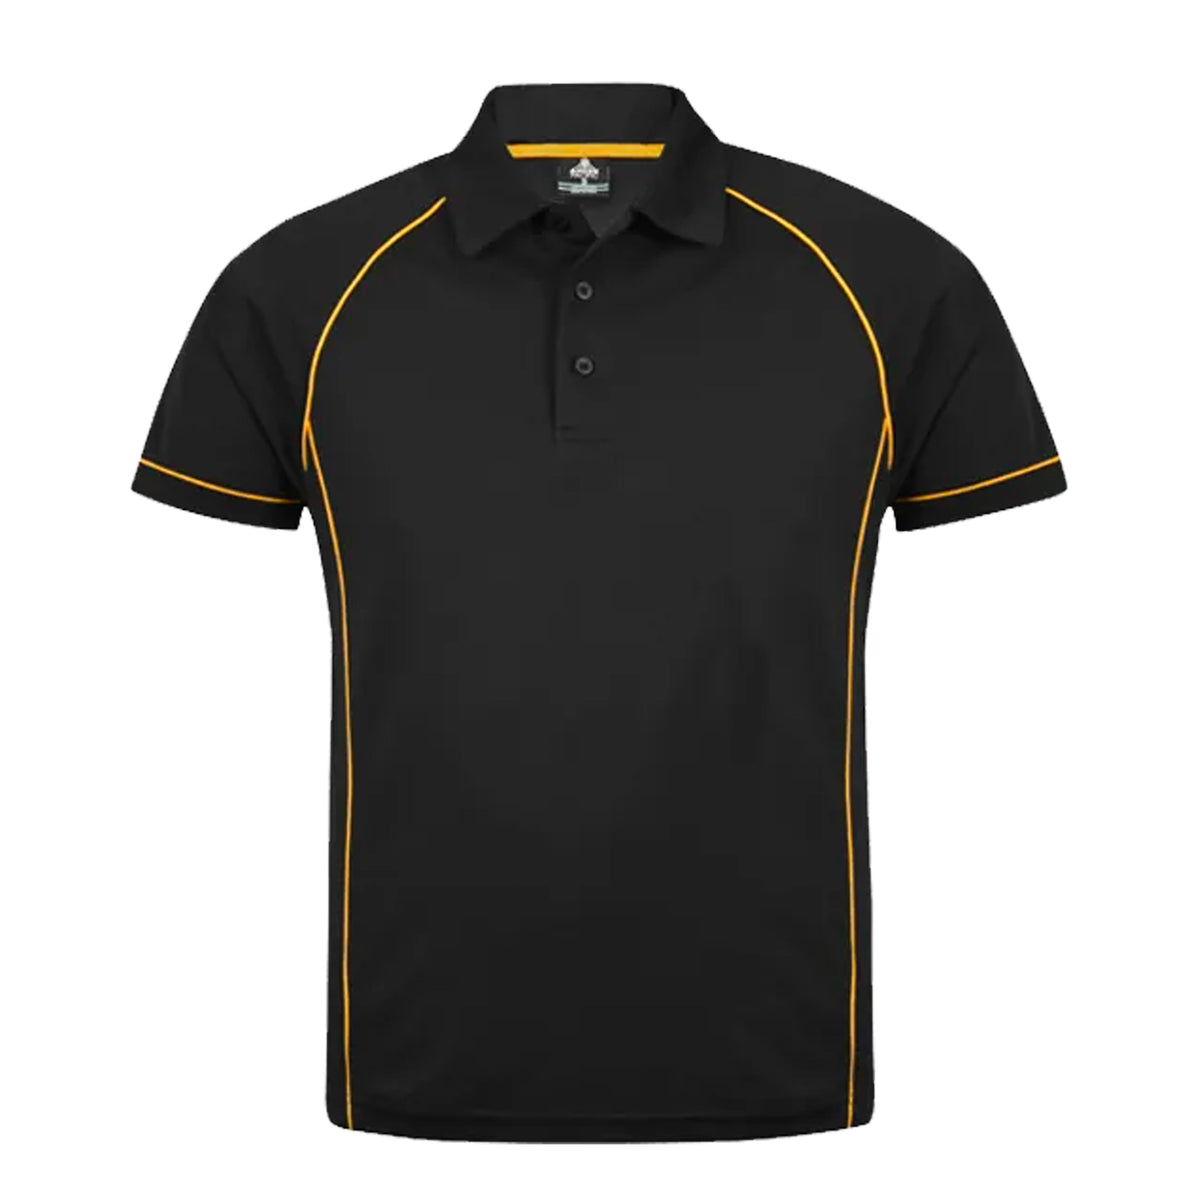 aussie pacific endeavour polos in black gold